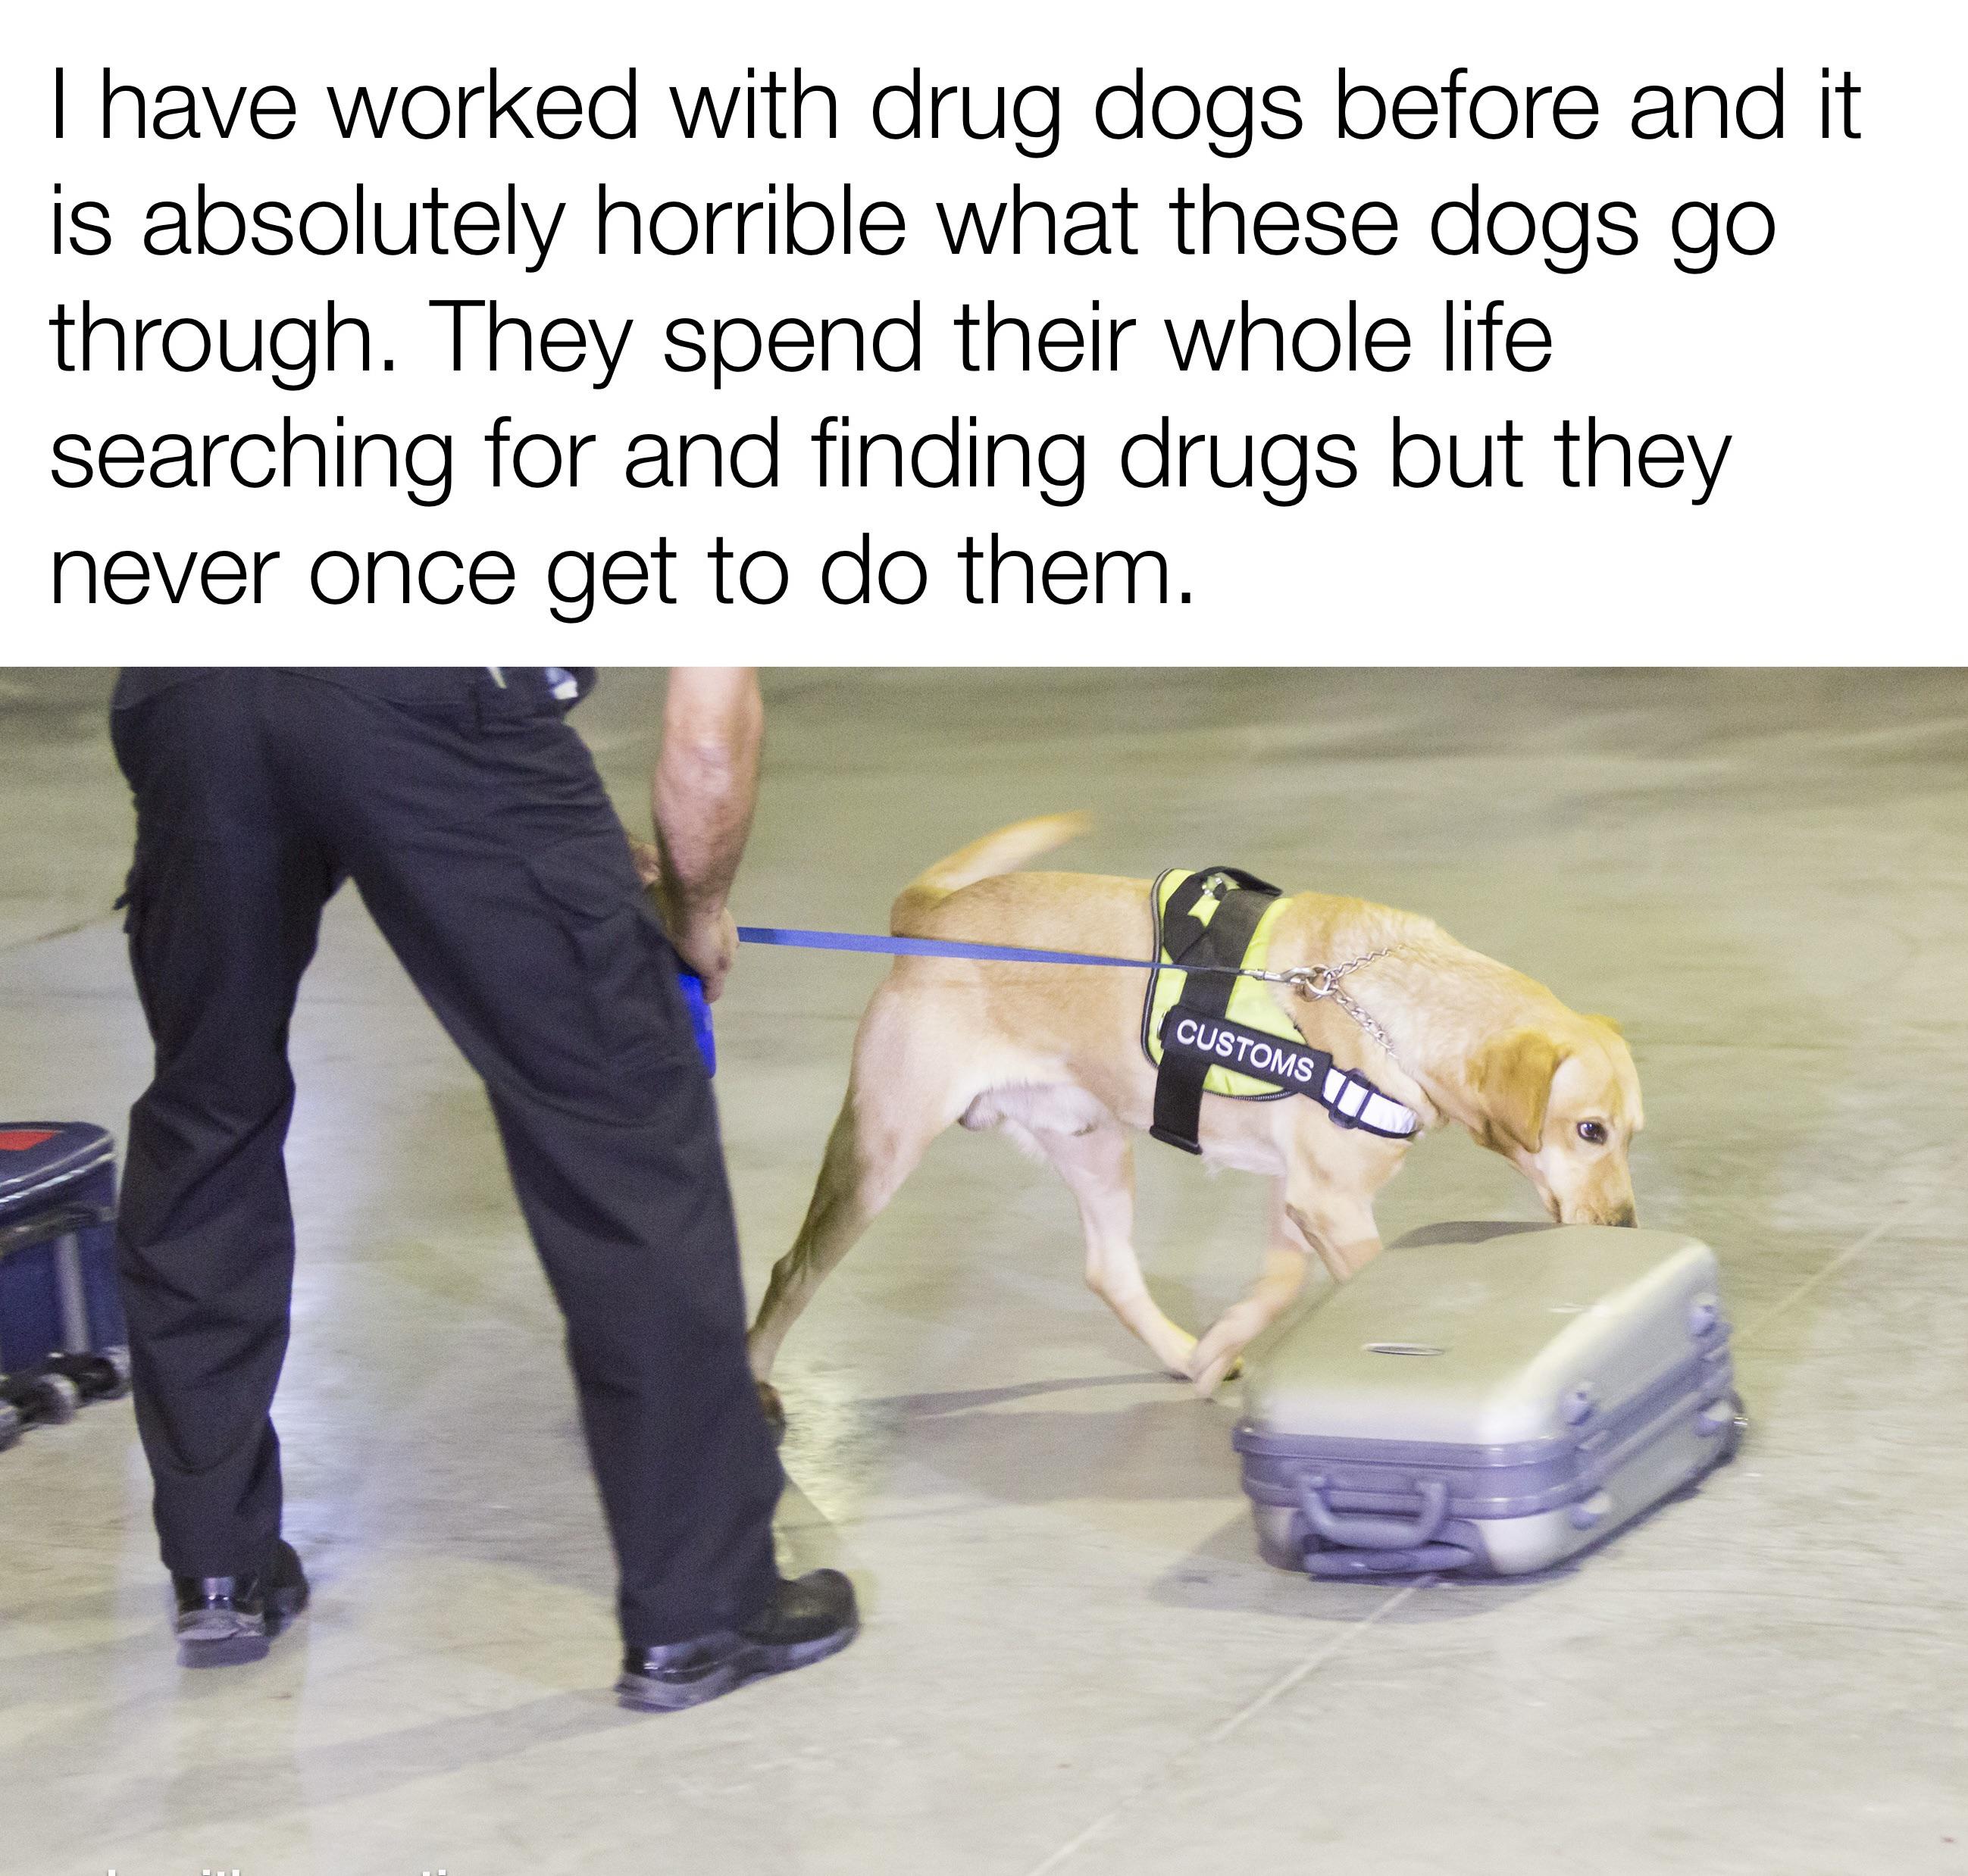 dank memes and funny pics - Dog - I have worked with drug dogs before and it is absolutely horrible what these dogs go through. They spend their whole life searching for and finding drugs but they never once get to do them. Customs